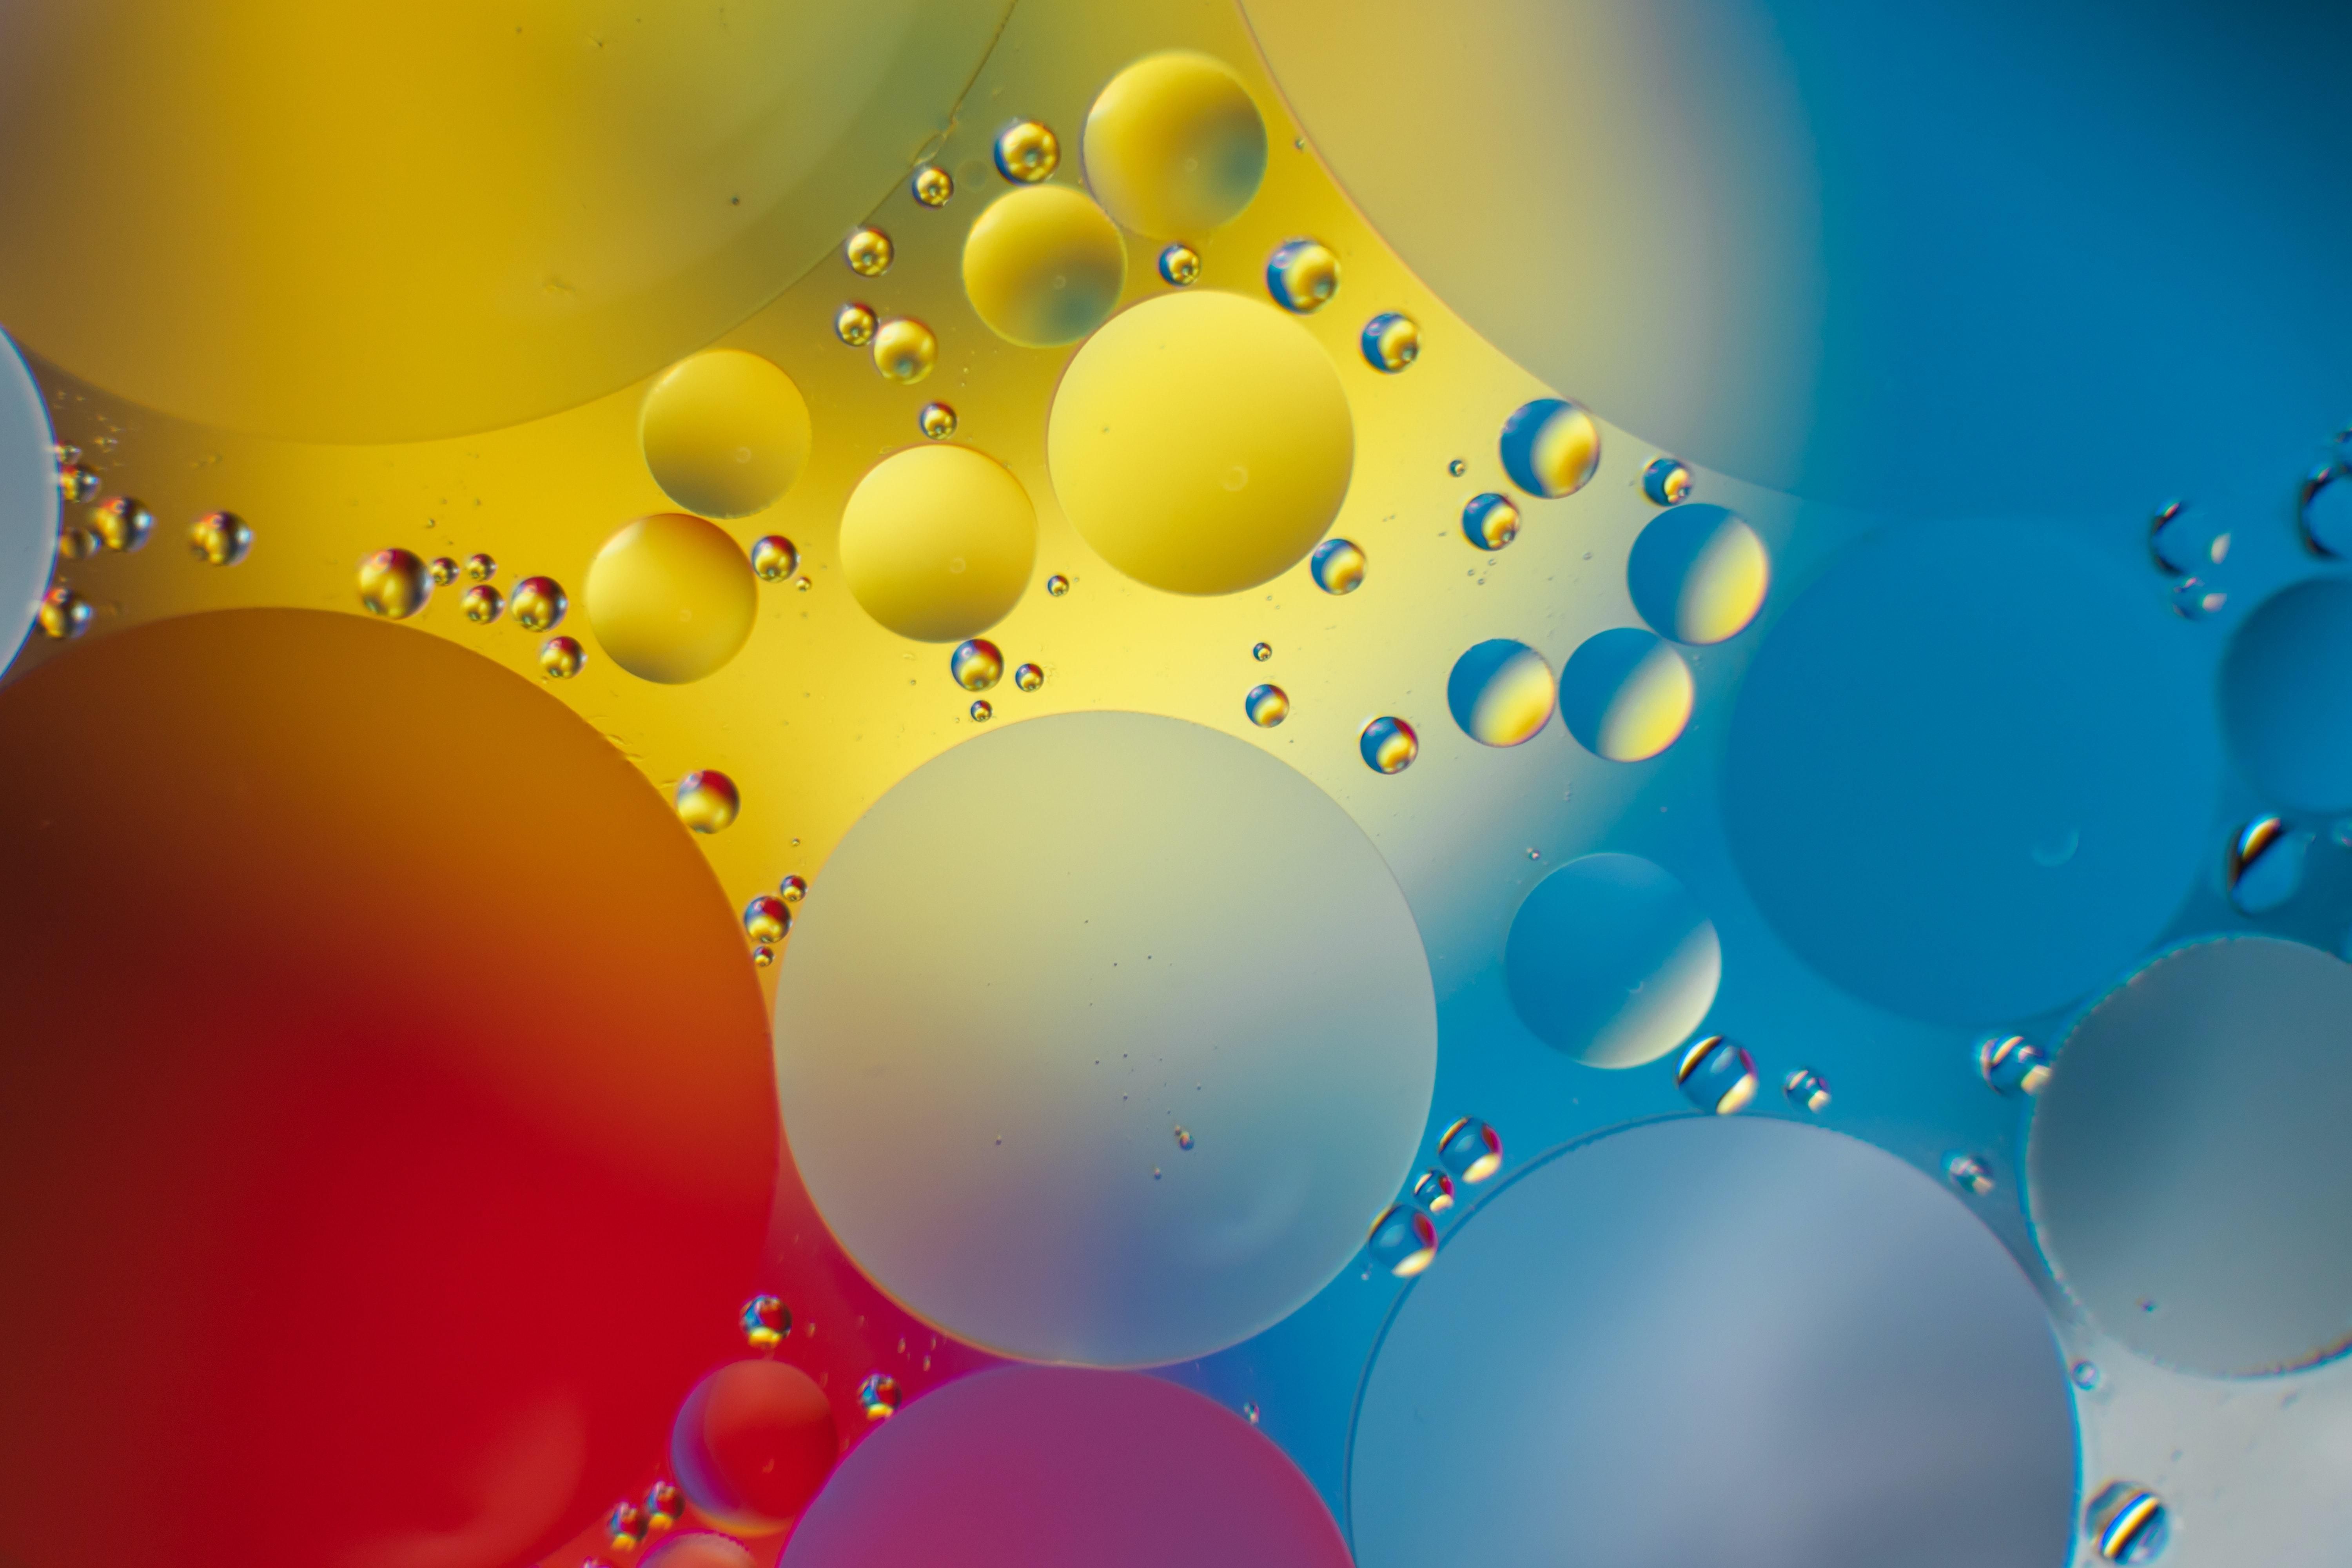 Bubbles Water Gradient Hd Wallpapers Wallpaper Cave